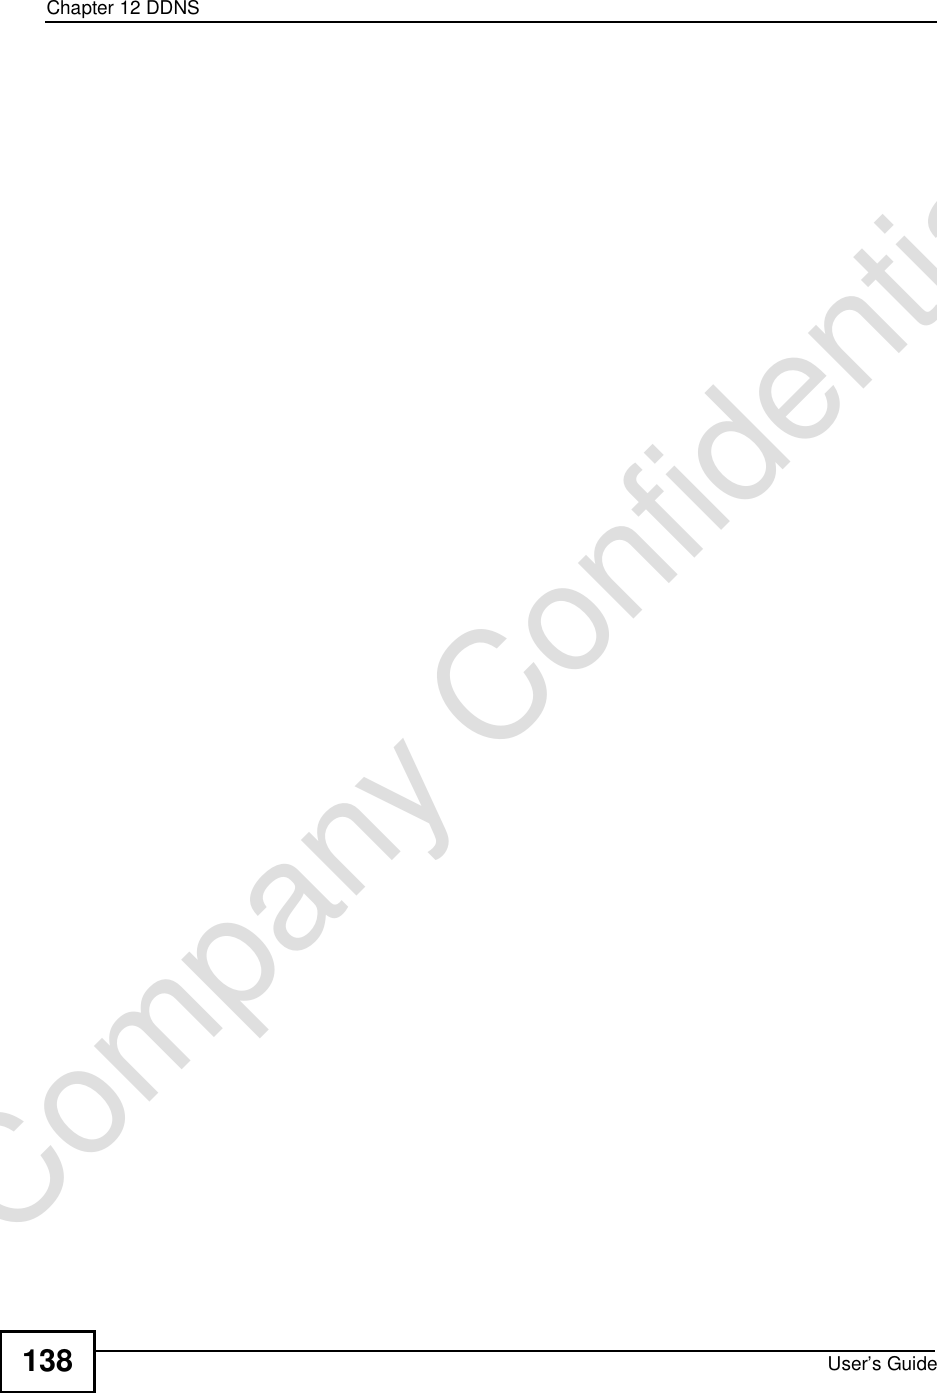 Chapter 12DDNSUser’s Guide138Company Confidential